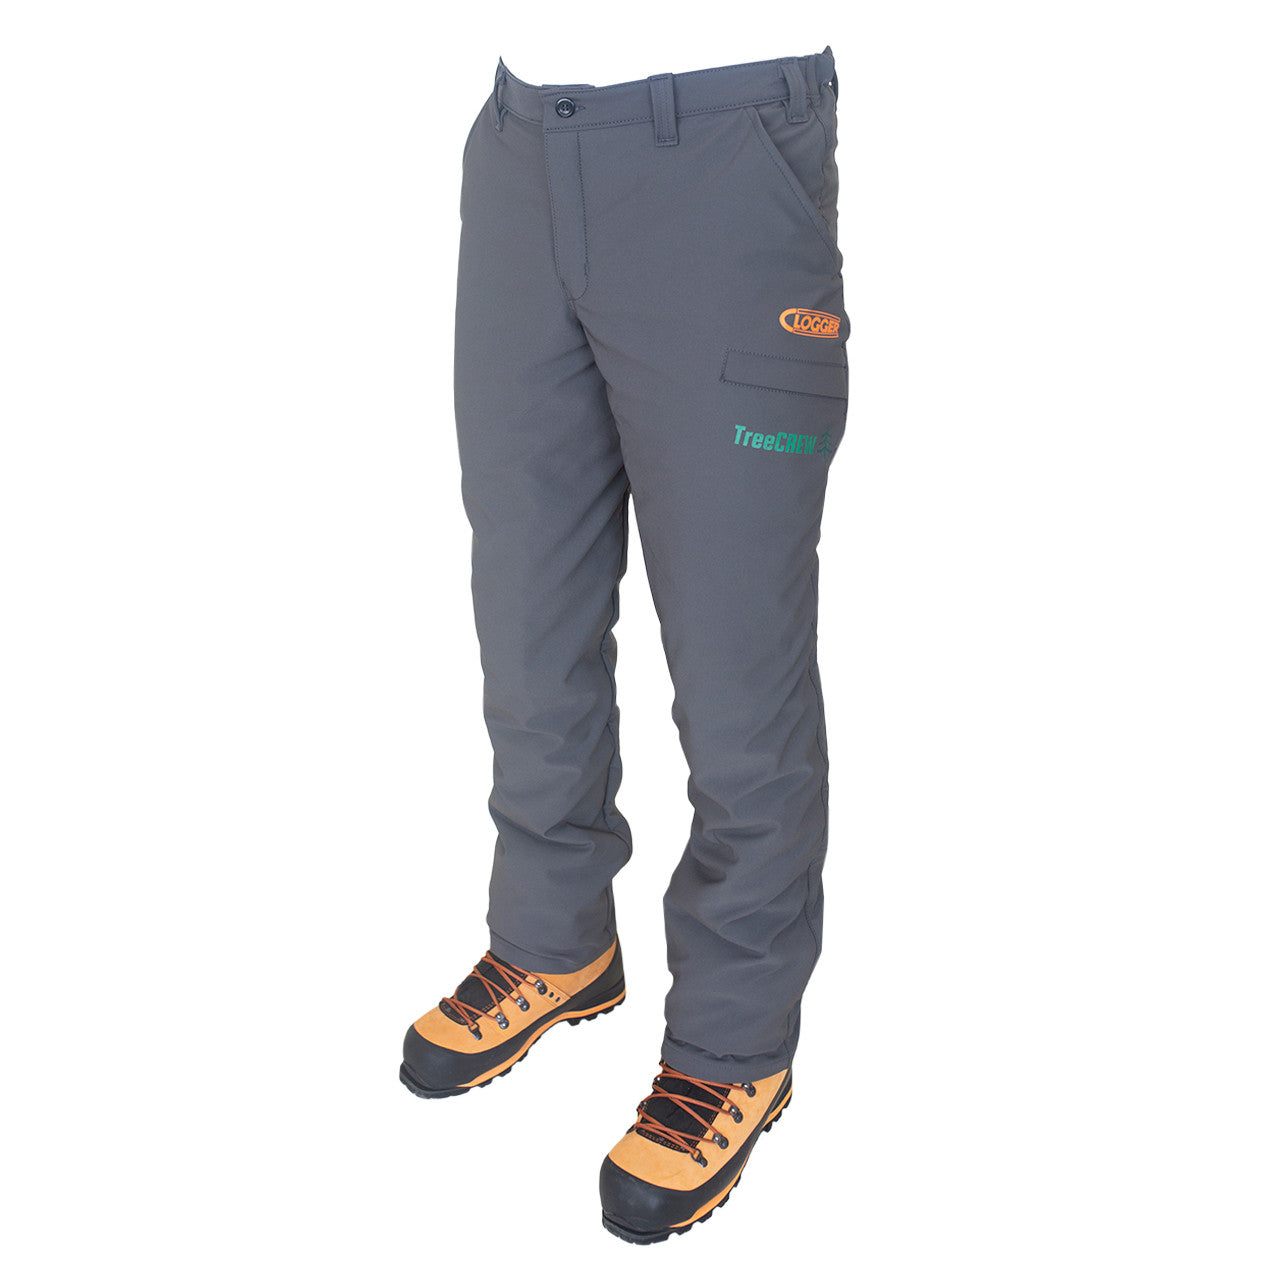 Clogger NEW Clogger TreeCREW Men’s Chainsaw Trousers